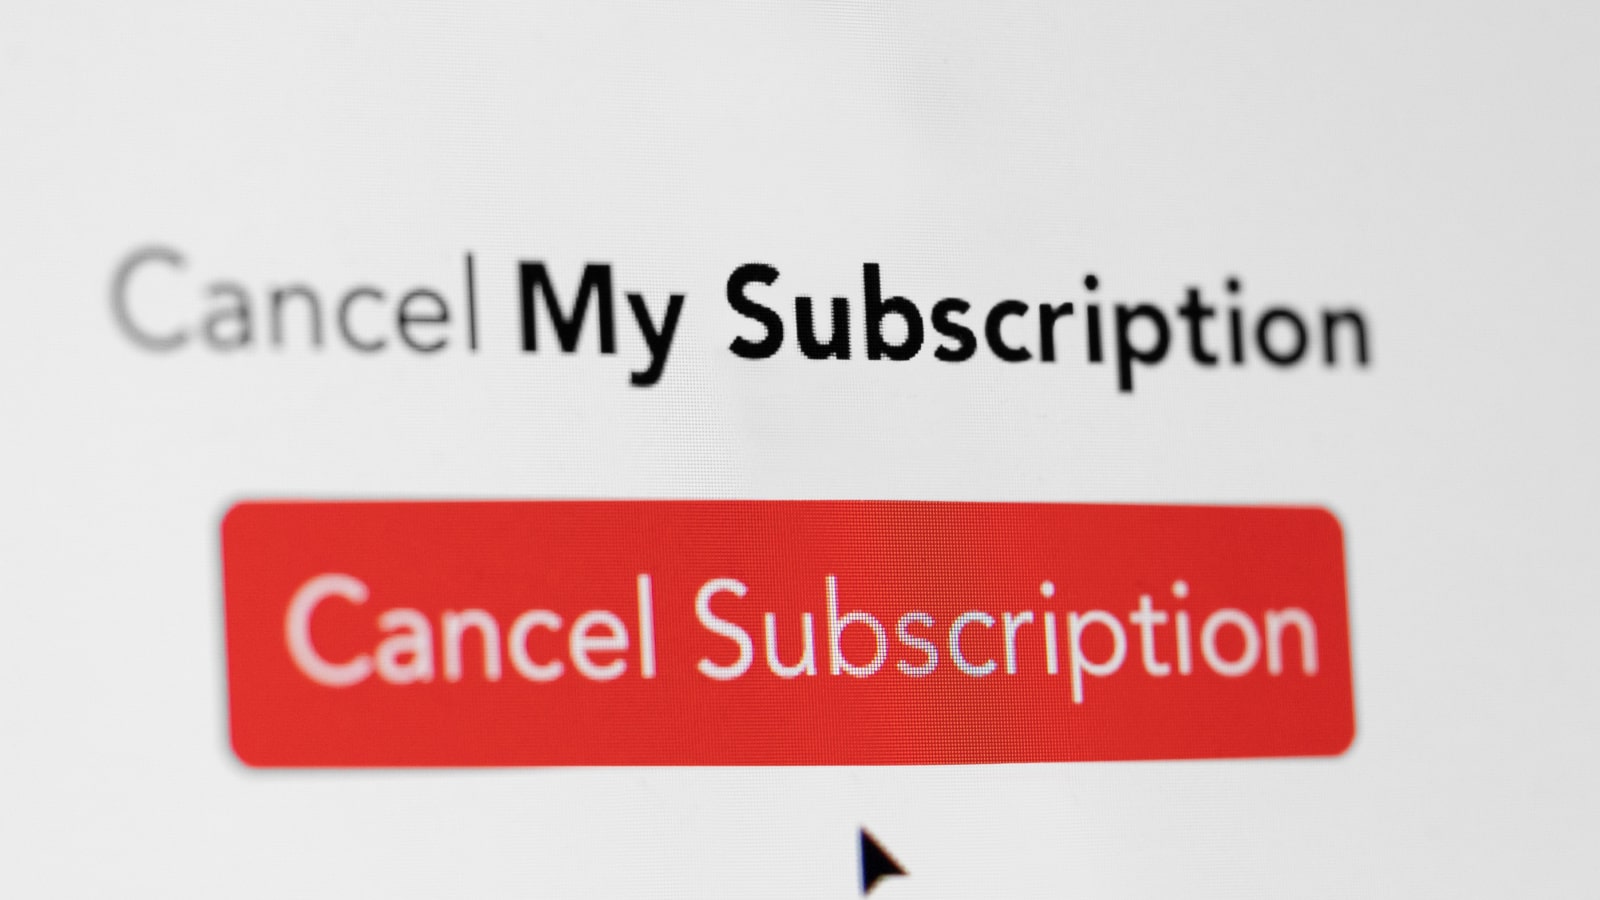 Close Up Of Computer Screen With Cancel My Subscription Message To Save Money In Cost Of Living Crisis